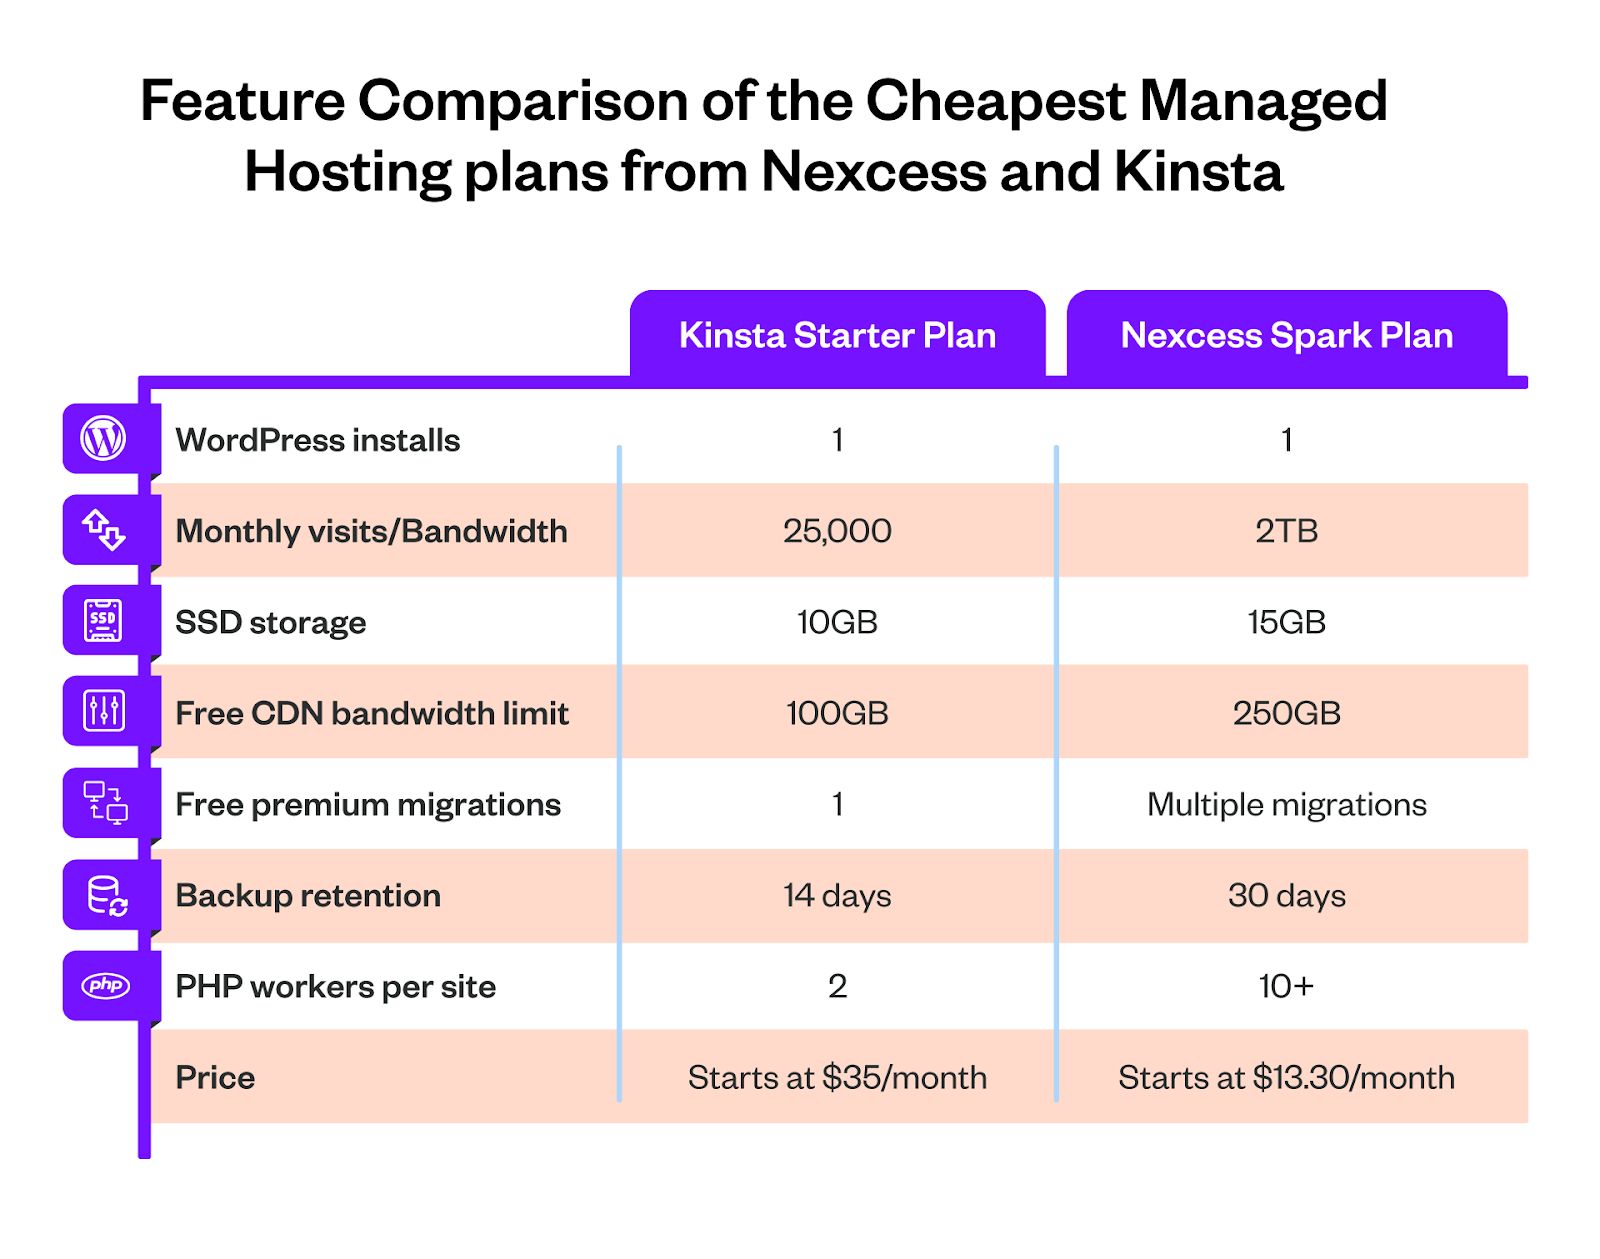 Comparison chart between the prices of the cheapest plans on Nexcess and Kinsta.